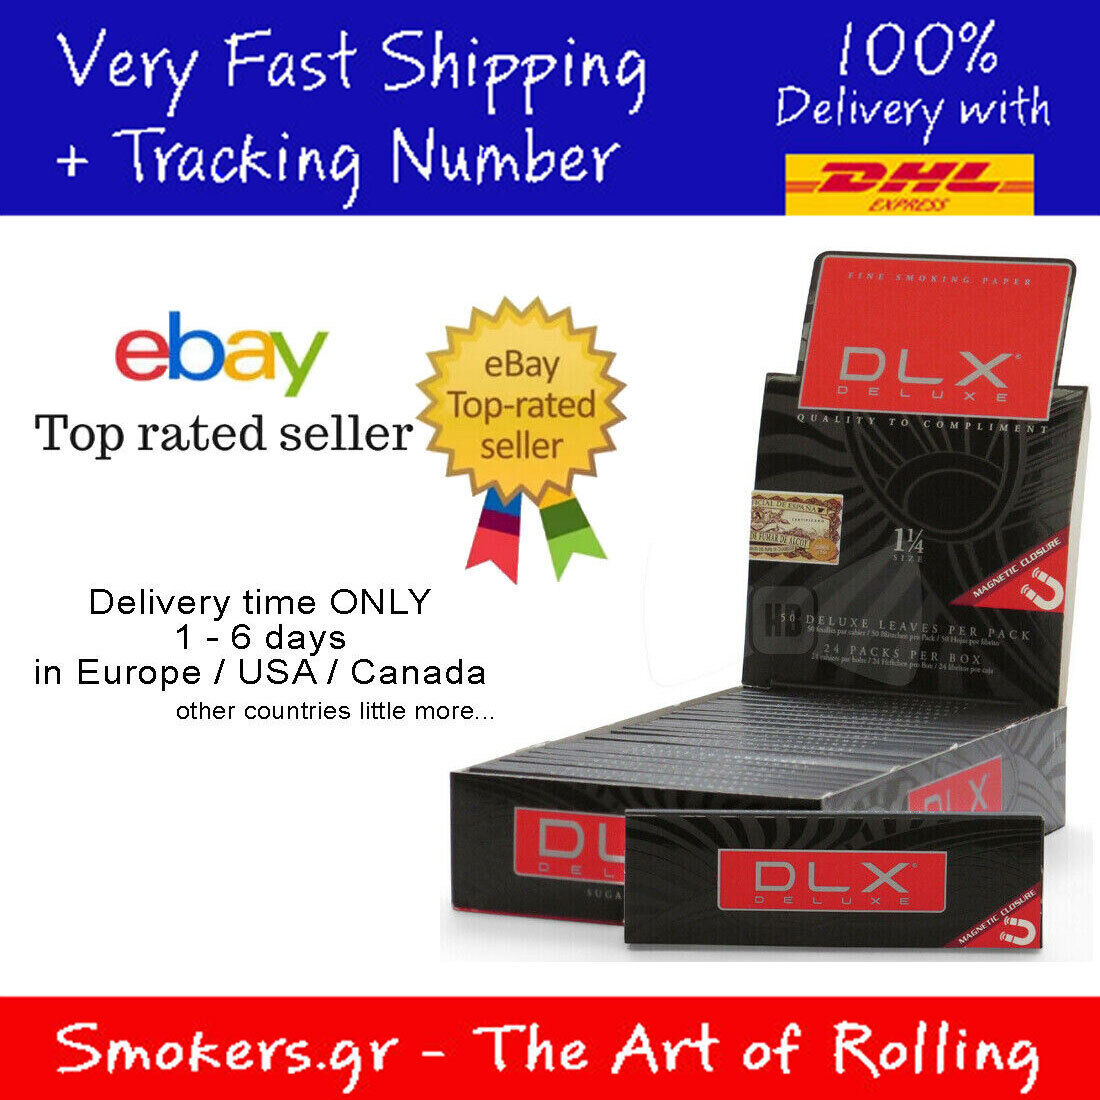 24 DLX Deluxe Ultra Thin Cigarette Rollihng Paper 1 1/4With MagnetΙc packs of 50